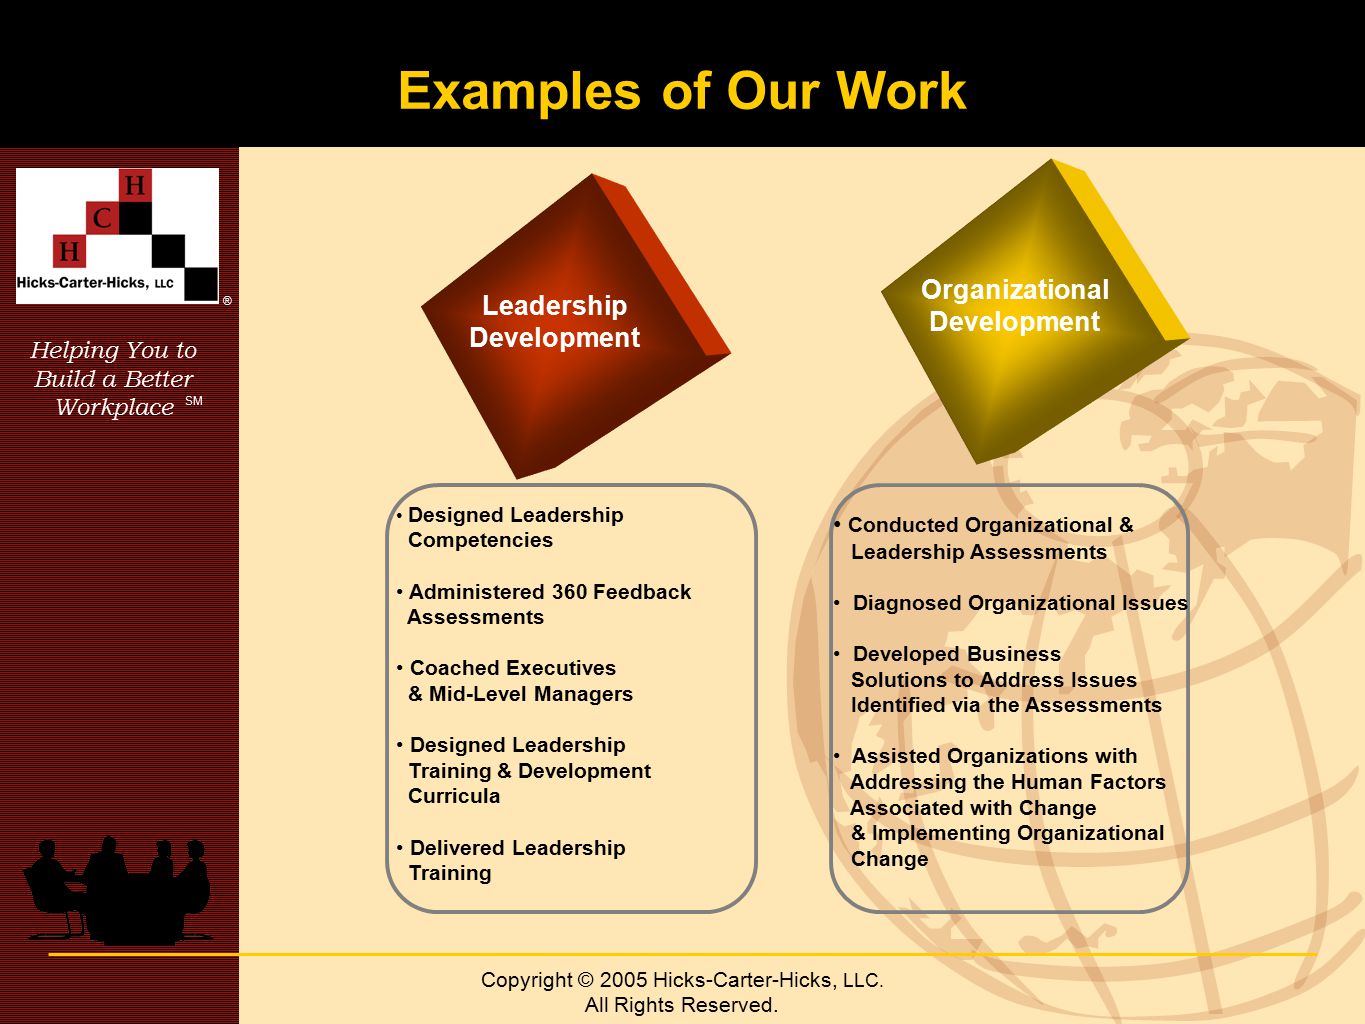 Helping You to Build a Better Workplace SM ® Copyright © 2005 Hicks-Carter-Hicks, LLC.